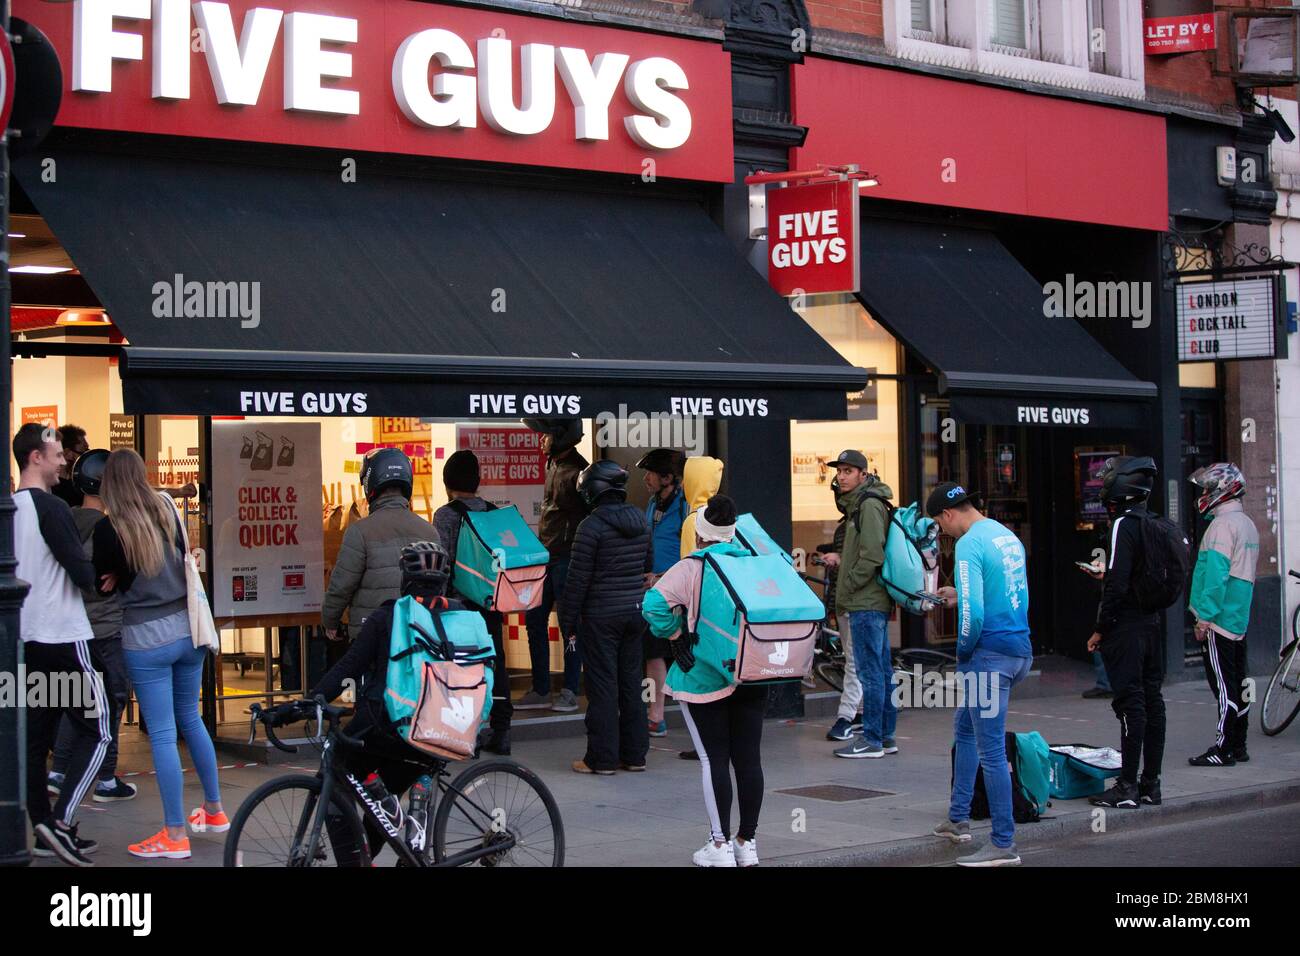 London, UK, 7 May 2020: on Clapham High Street, at a branch of Five Guys burger chain, many delivery riders and customers collecting online orders gather outside and social distancing rules are not strictly met. Anna Watson/Alamy Live News Stock Photo